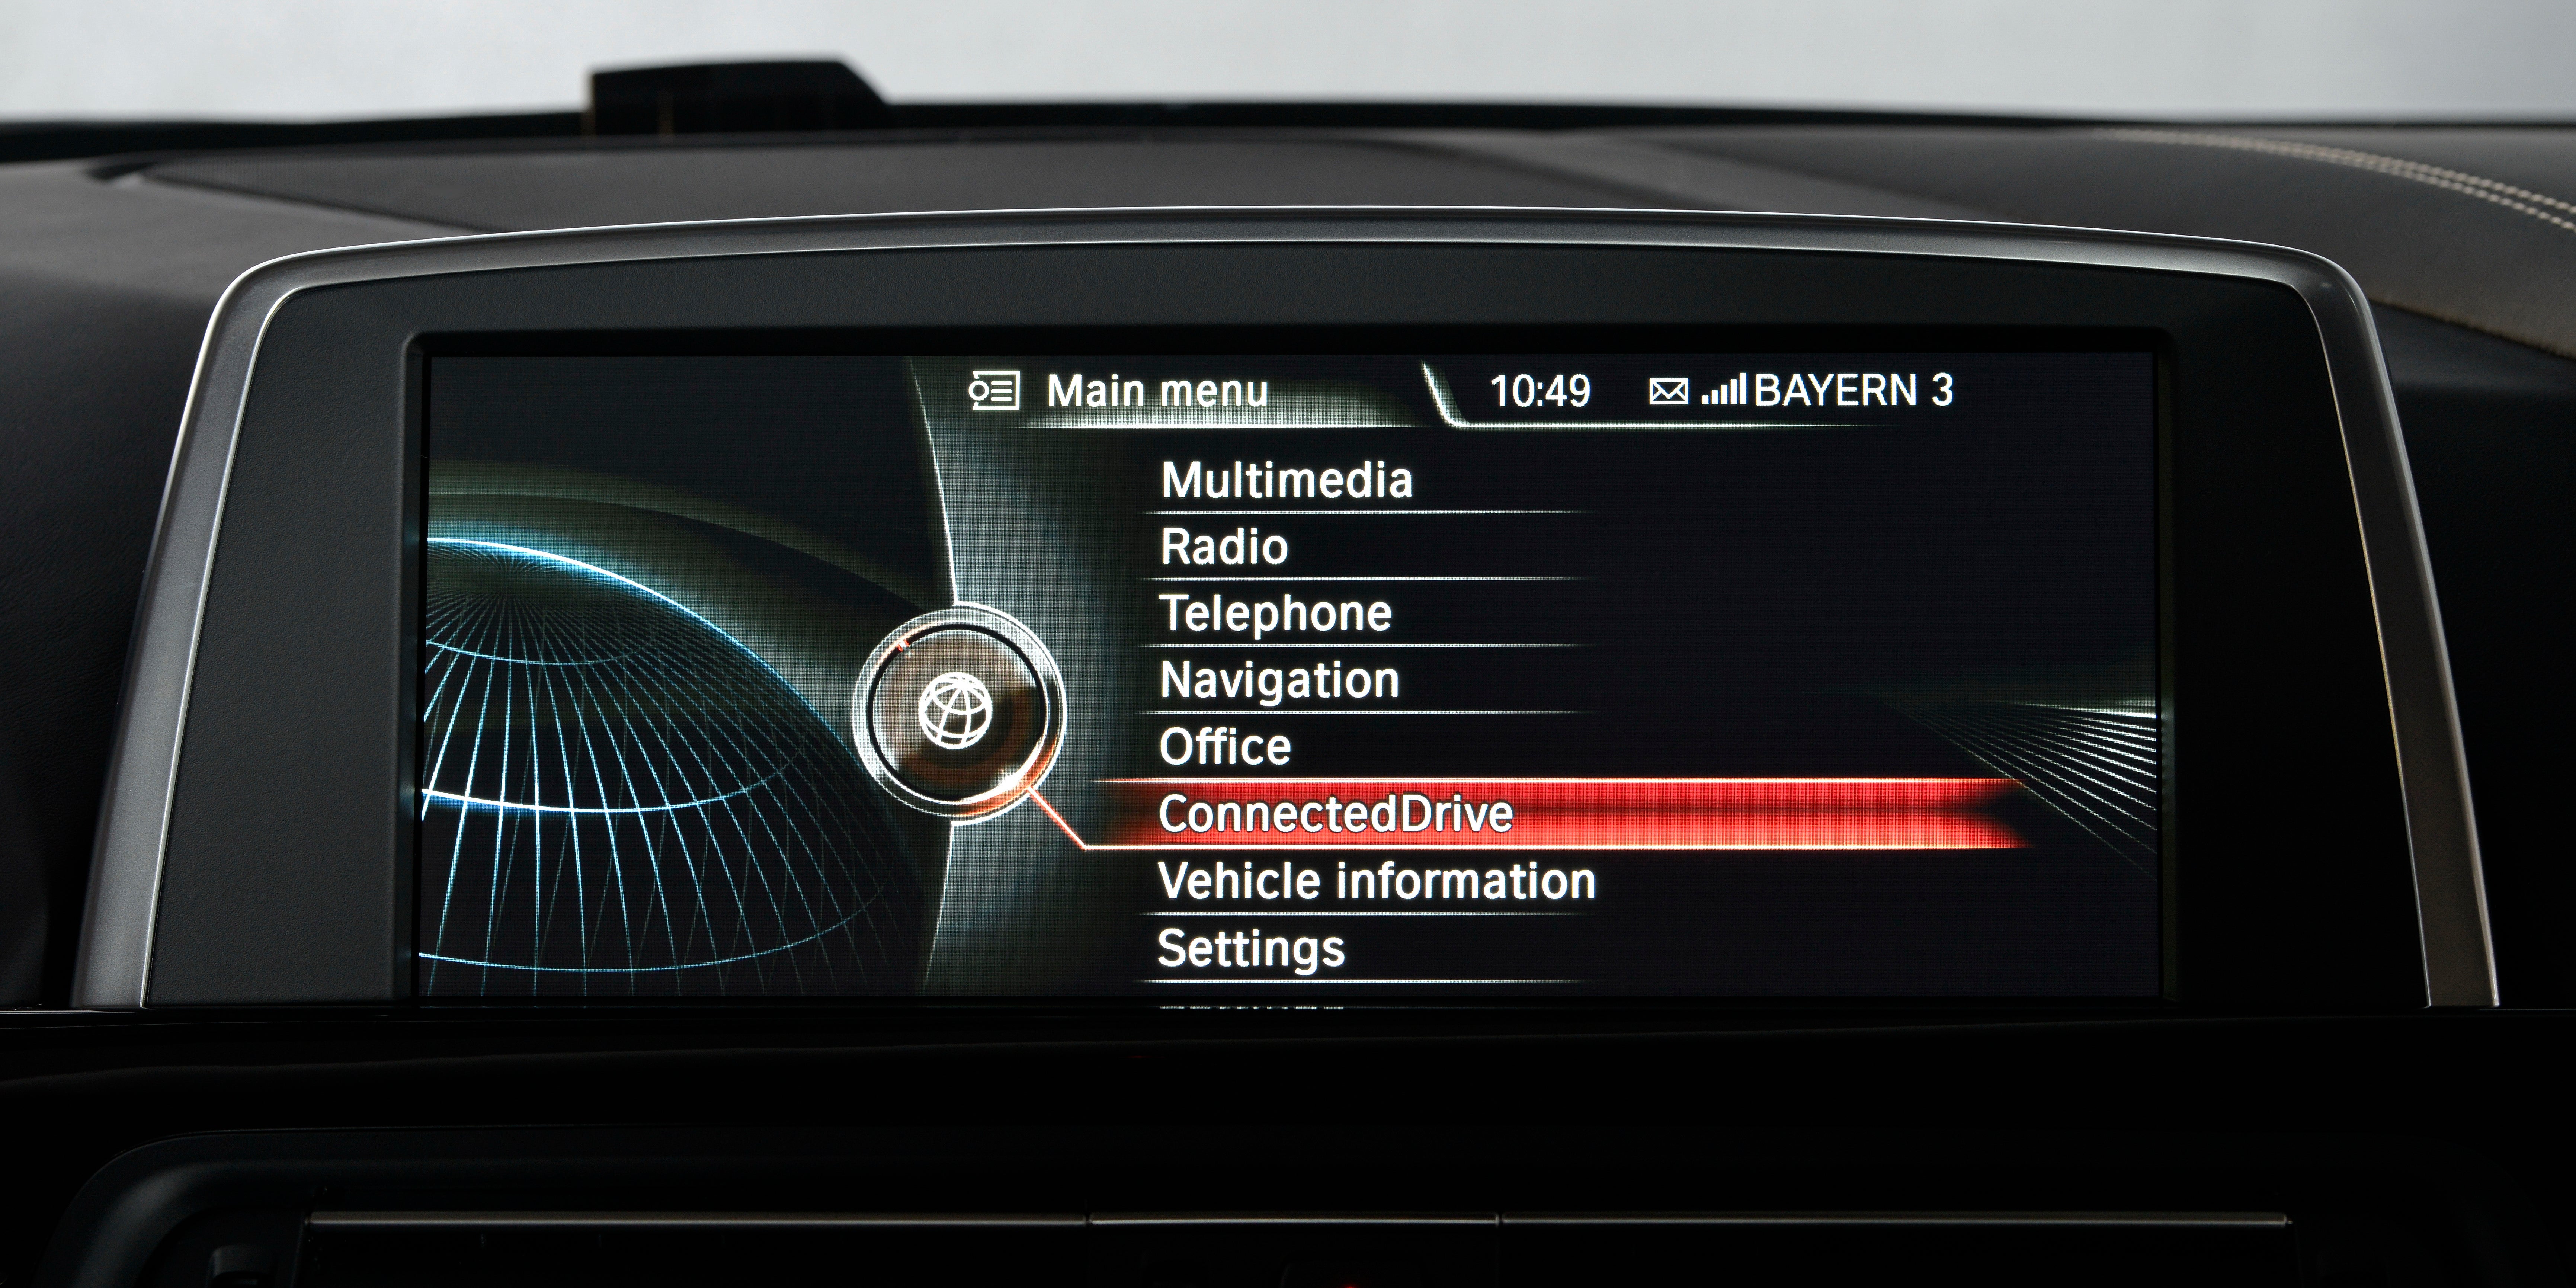 Samsung S-Voice and Apple Siri will be supported in 2014 BMW iDrive equipped vehicles